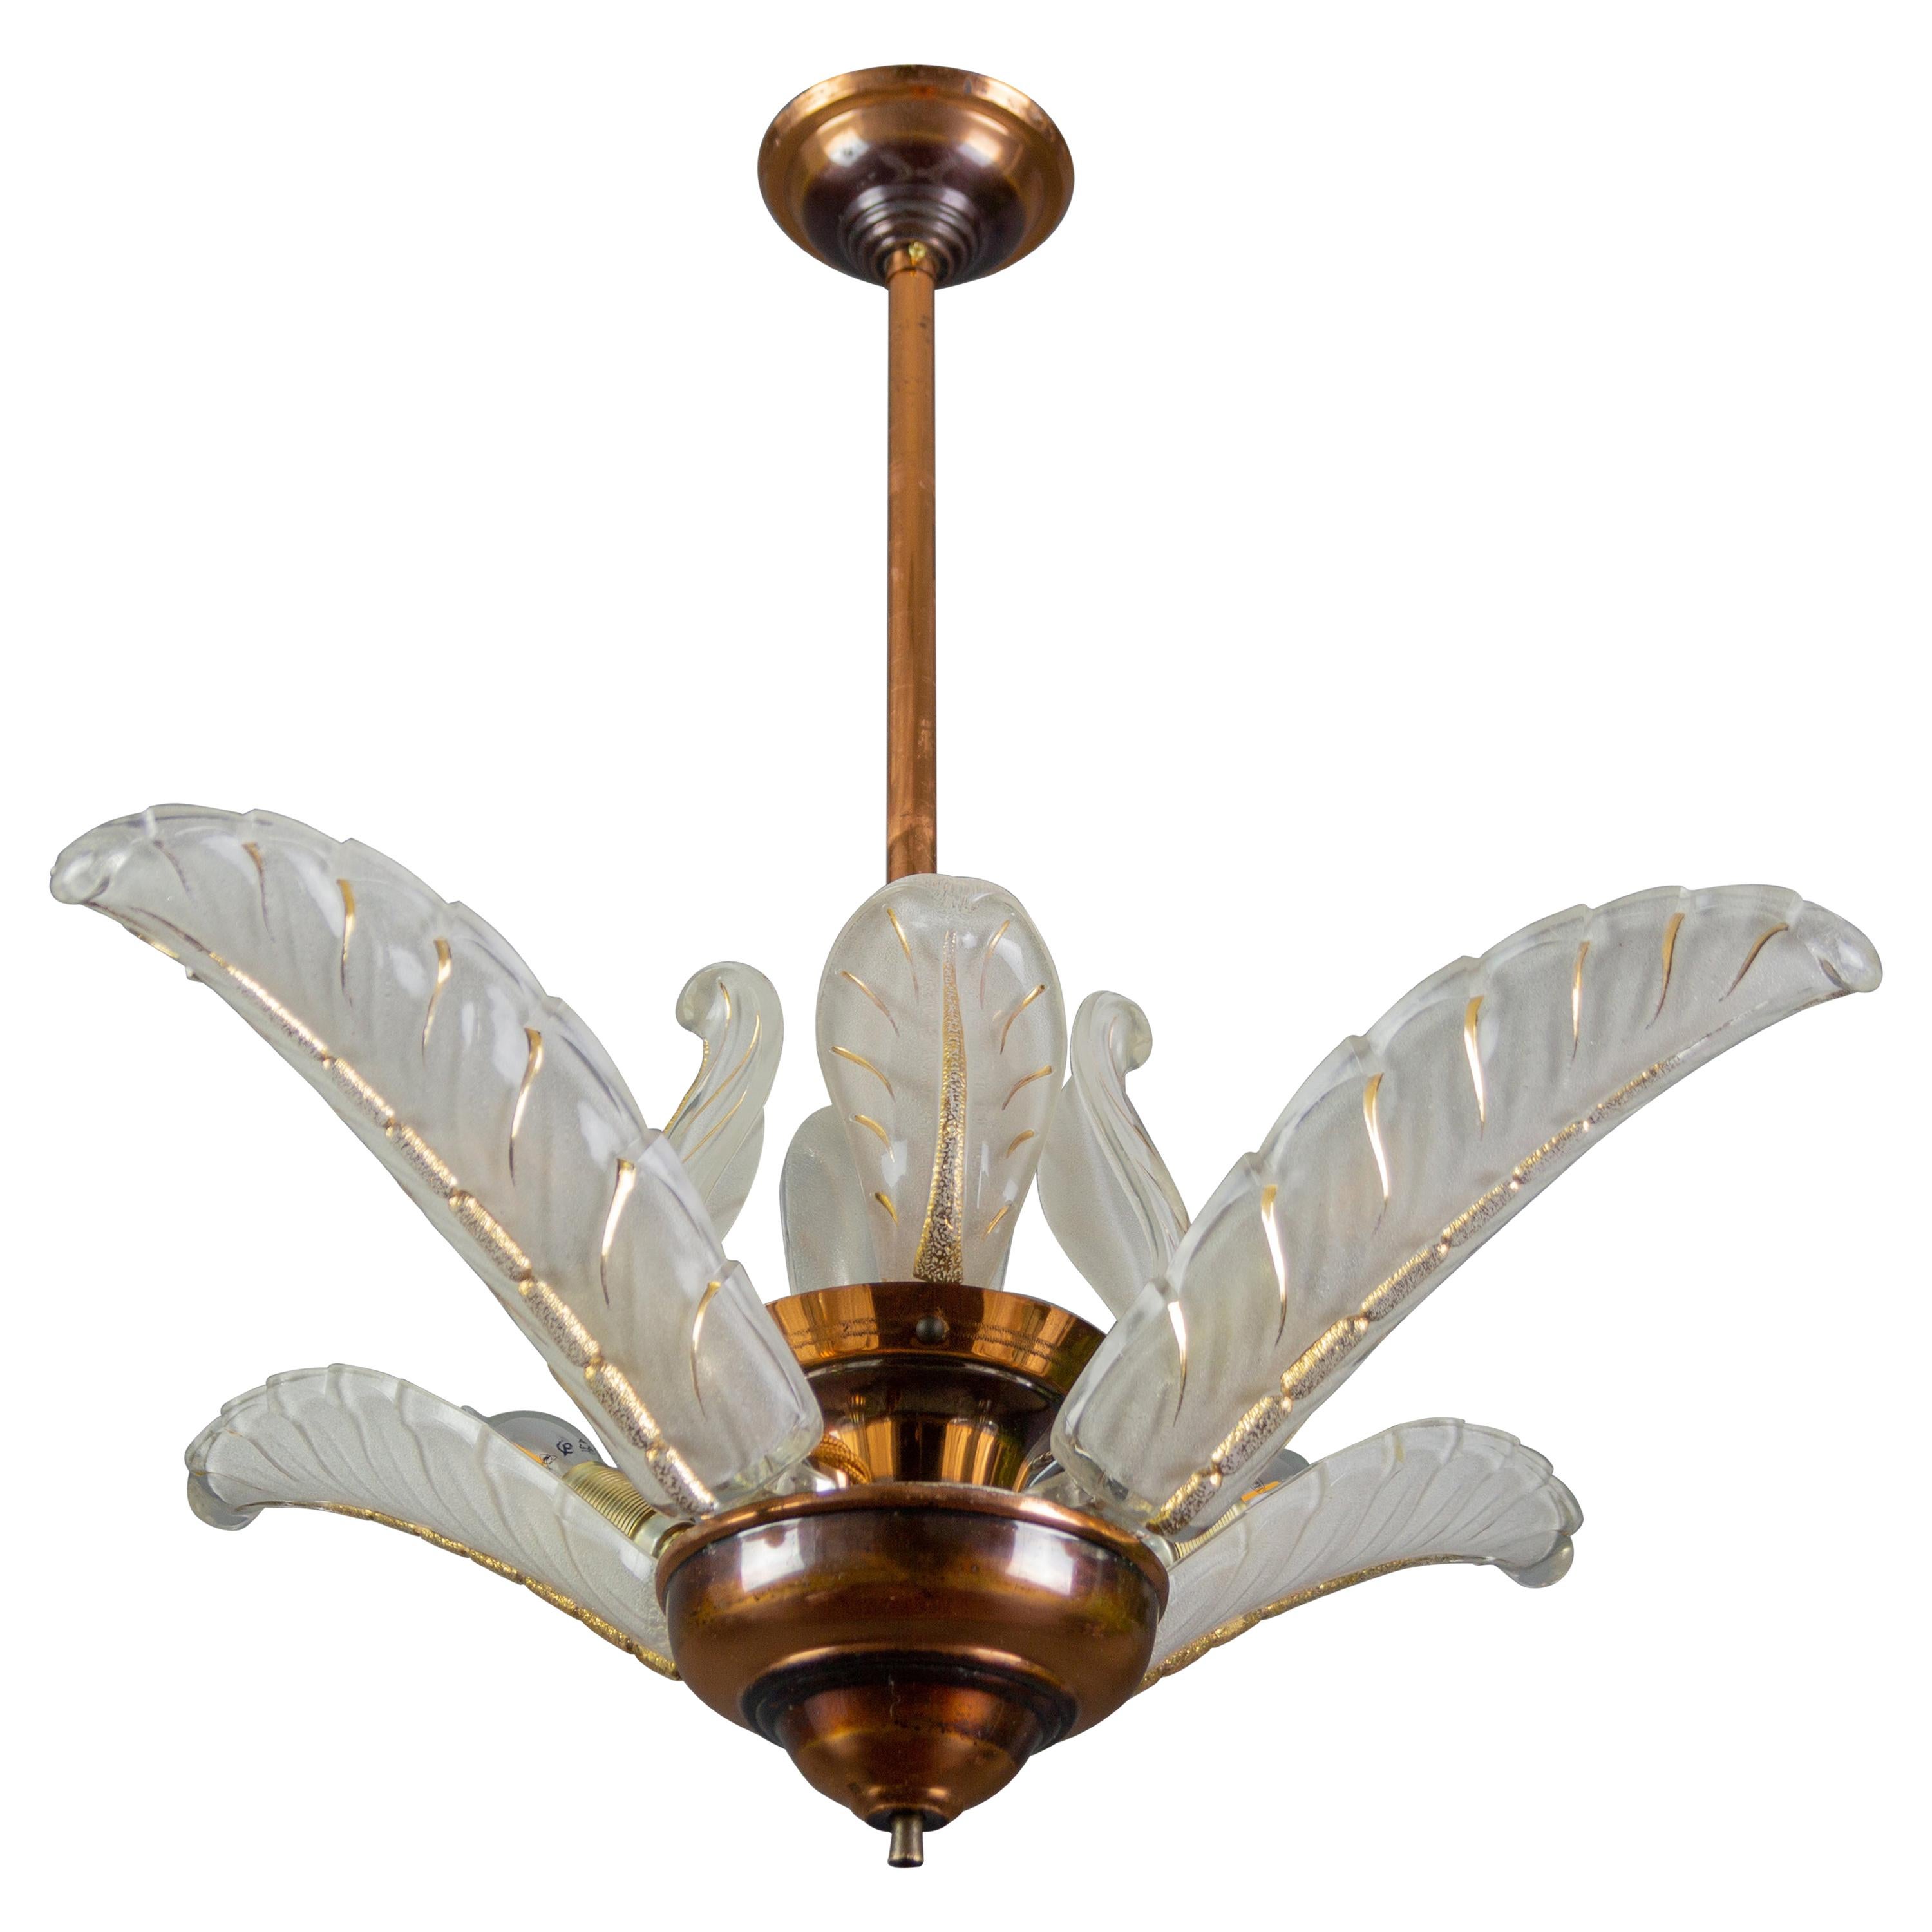 French Art Deco Four-Light Copper and Frosted Glass Chandelier by Ezan, 1930s